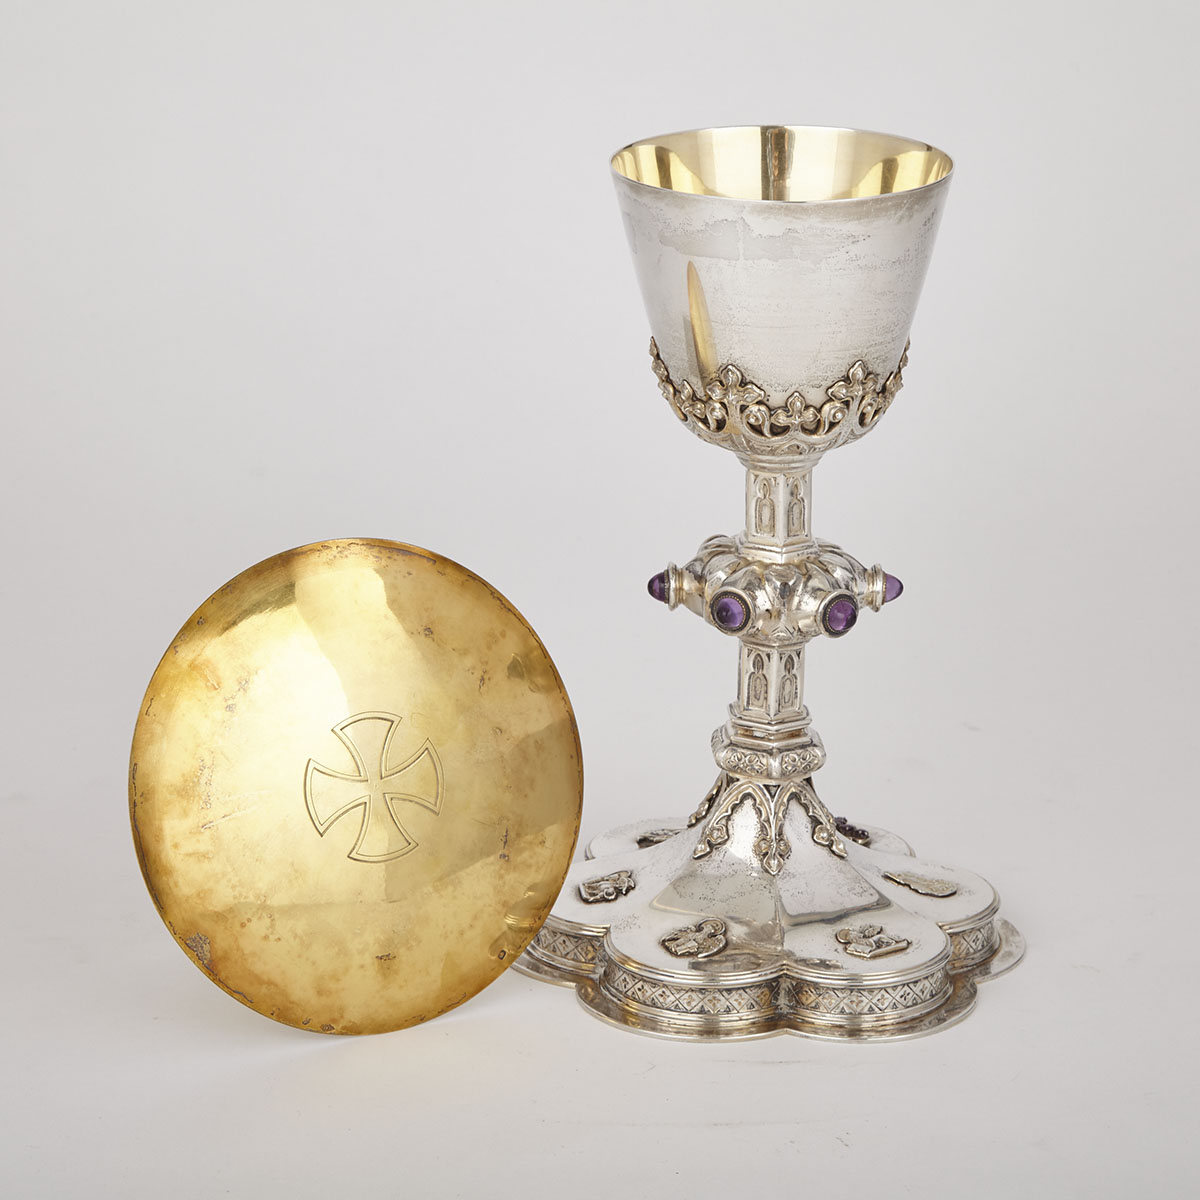 American Silver Chalice, W.J. Feeley Co., Providence, R.I., and French Silver-Gilt Paten, early 20th century  